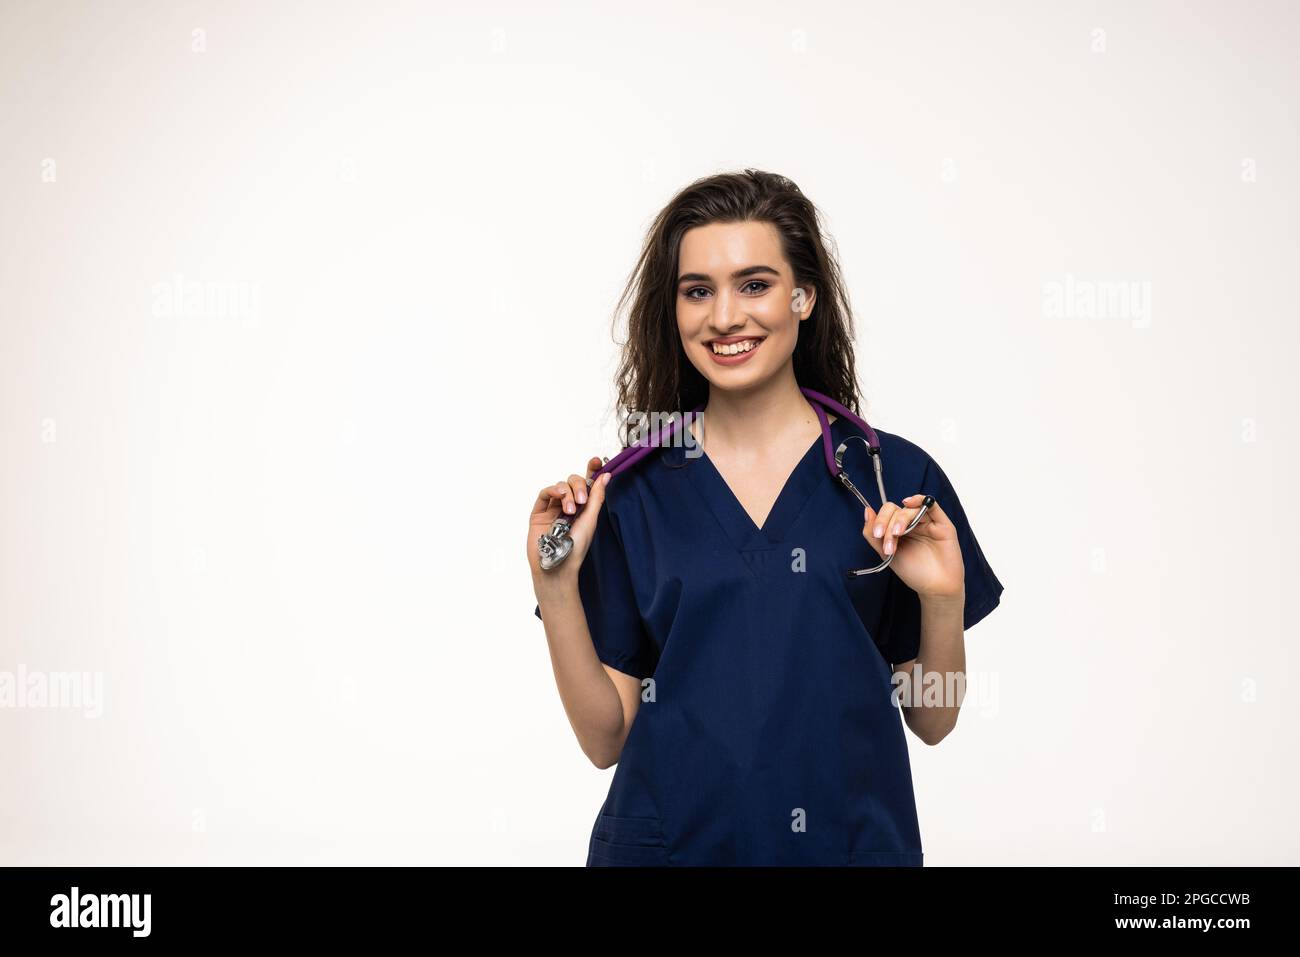 medicine, profession and healthcare concept - happy smiling female doctor or scientist in white coat Stock Photo